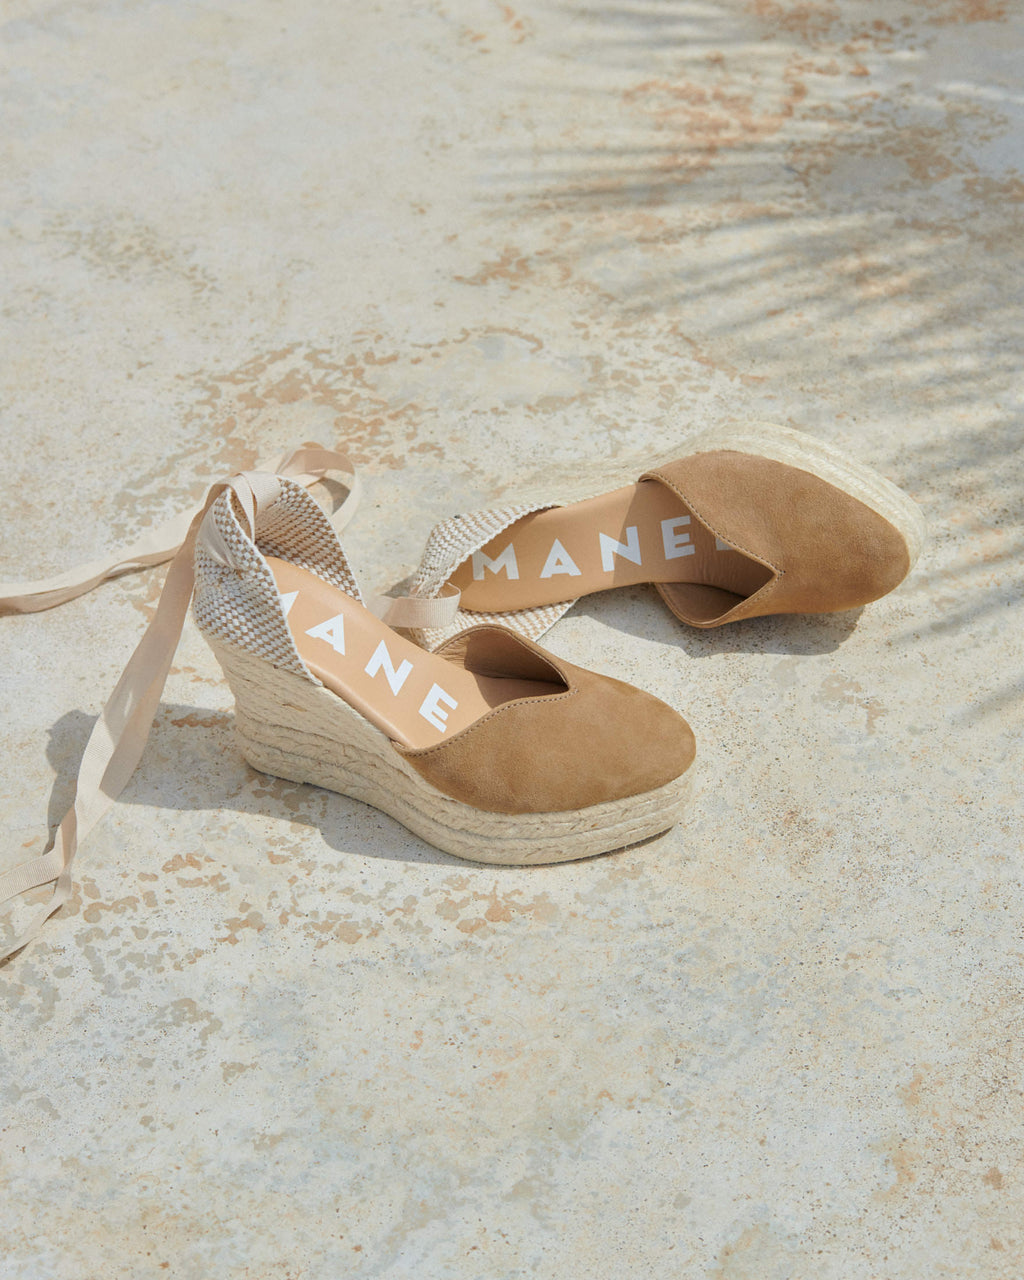 Heart-Shaped Wedges Sandals - Hamptons - Vintage Taupe